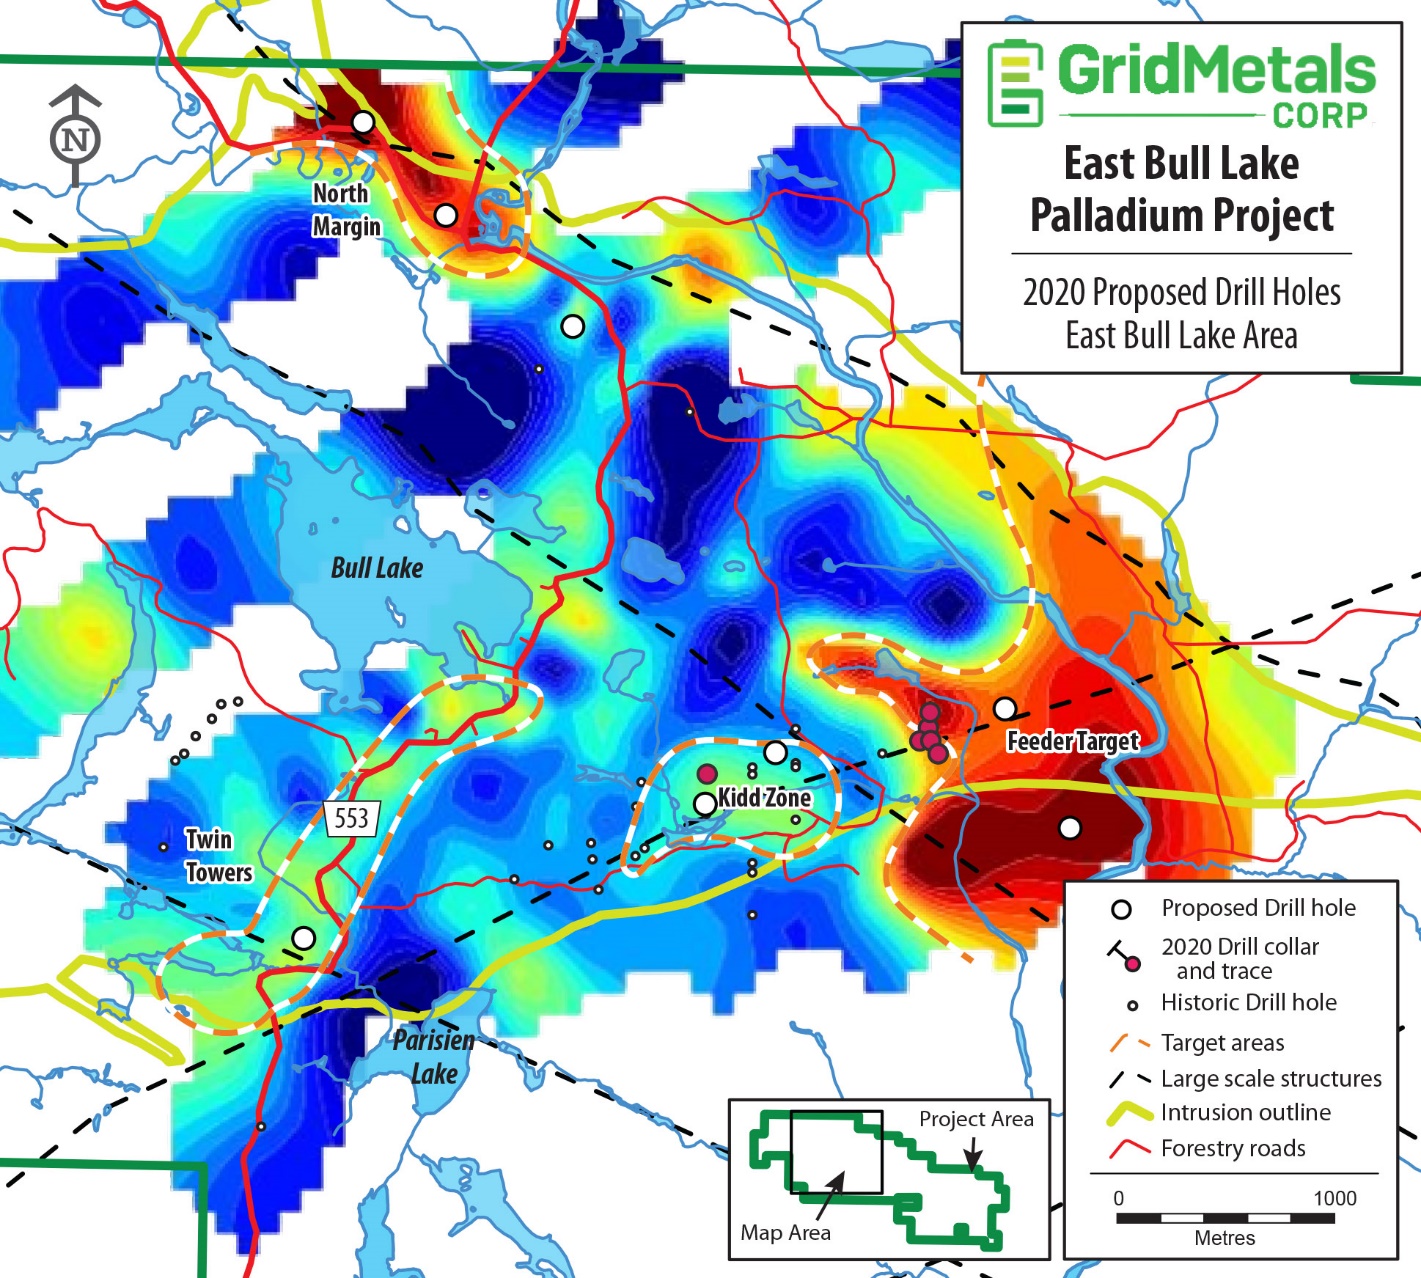 Grid Metals Corp., Thursday, August 6, 2020, Press release picture